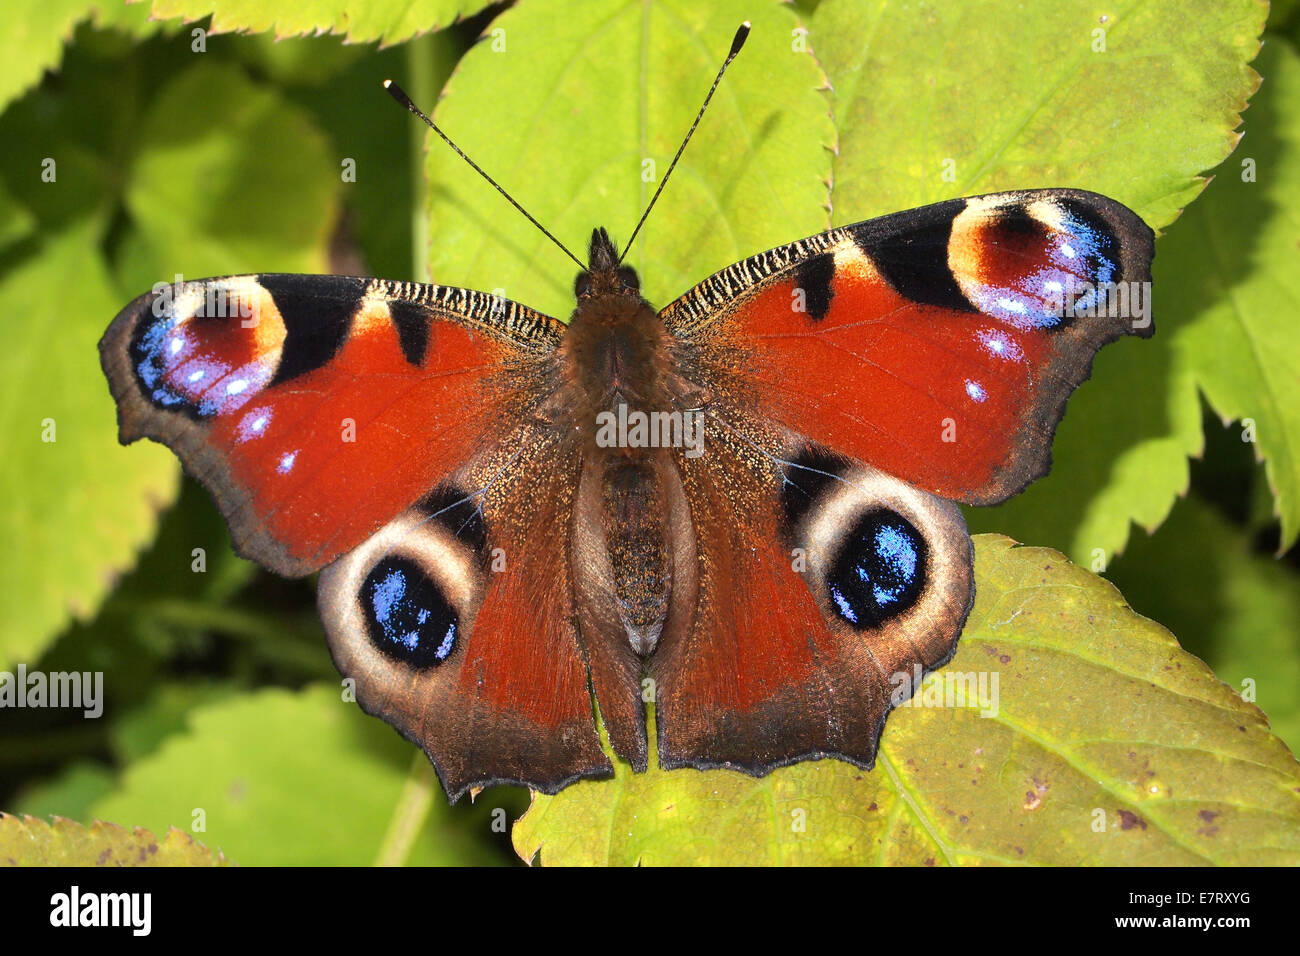 Peacock butterfly,UK Stock Photo